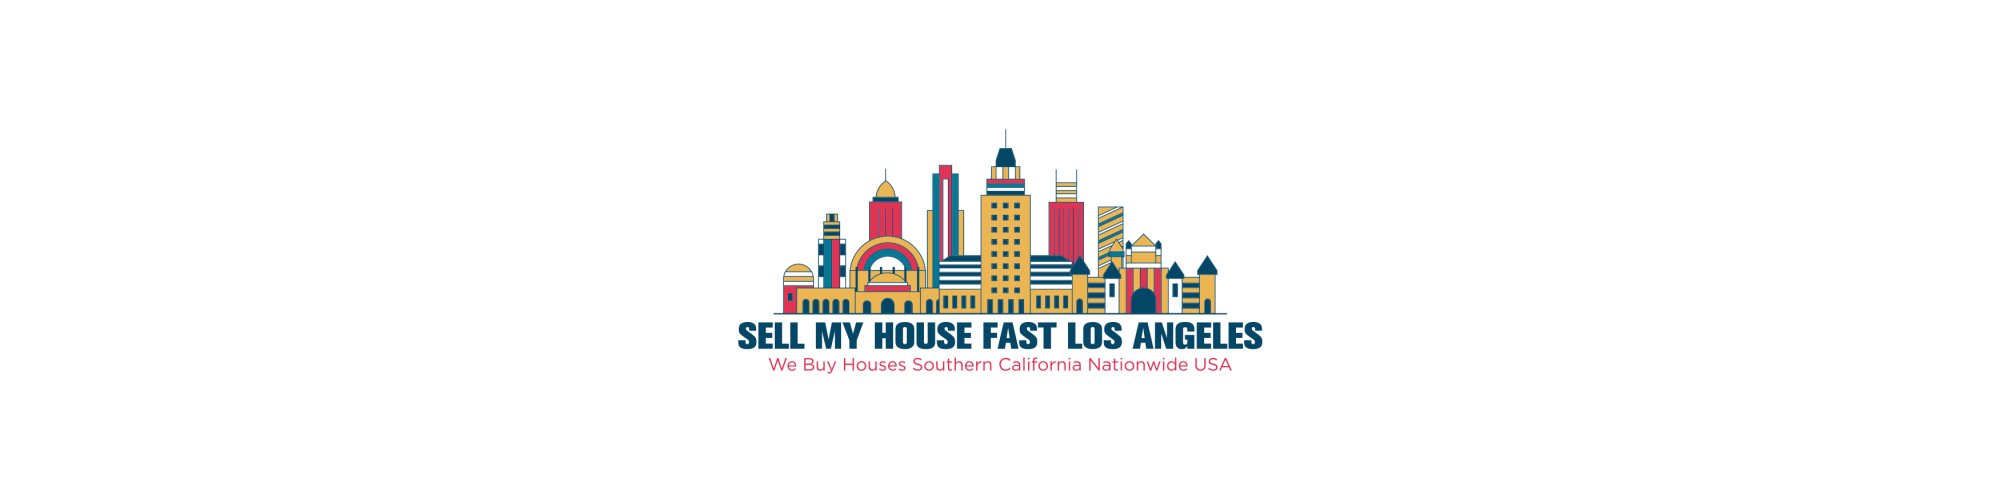 Sell My House Los Angeles